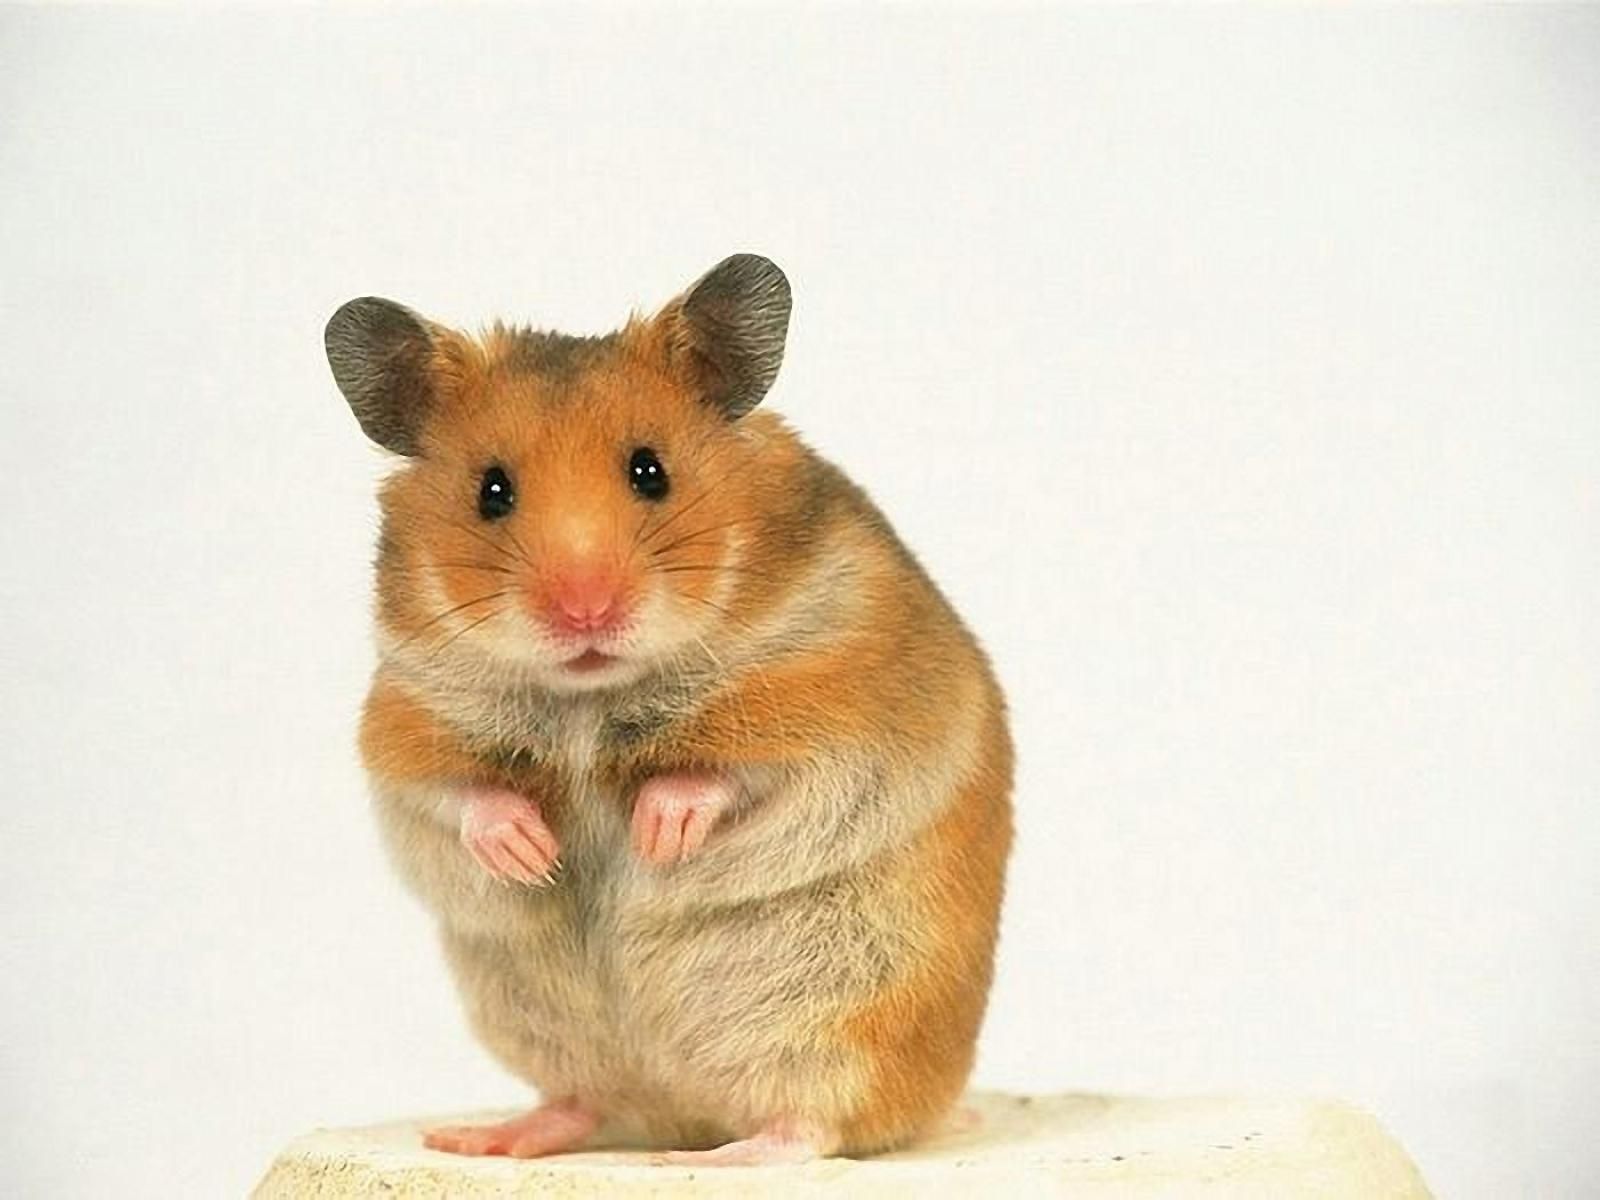 Pet Hamster 1600x1200 Wallpapers, 1600x1200 Wallpapers & Pictures ...